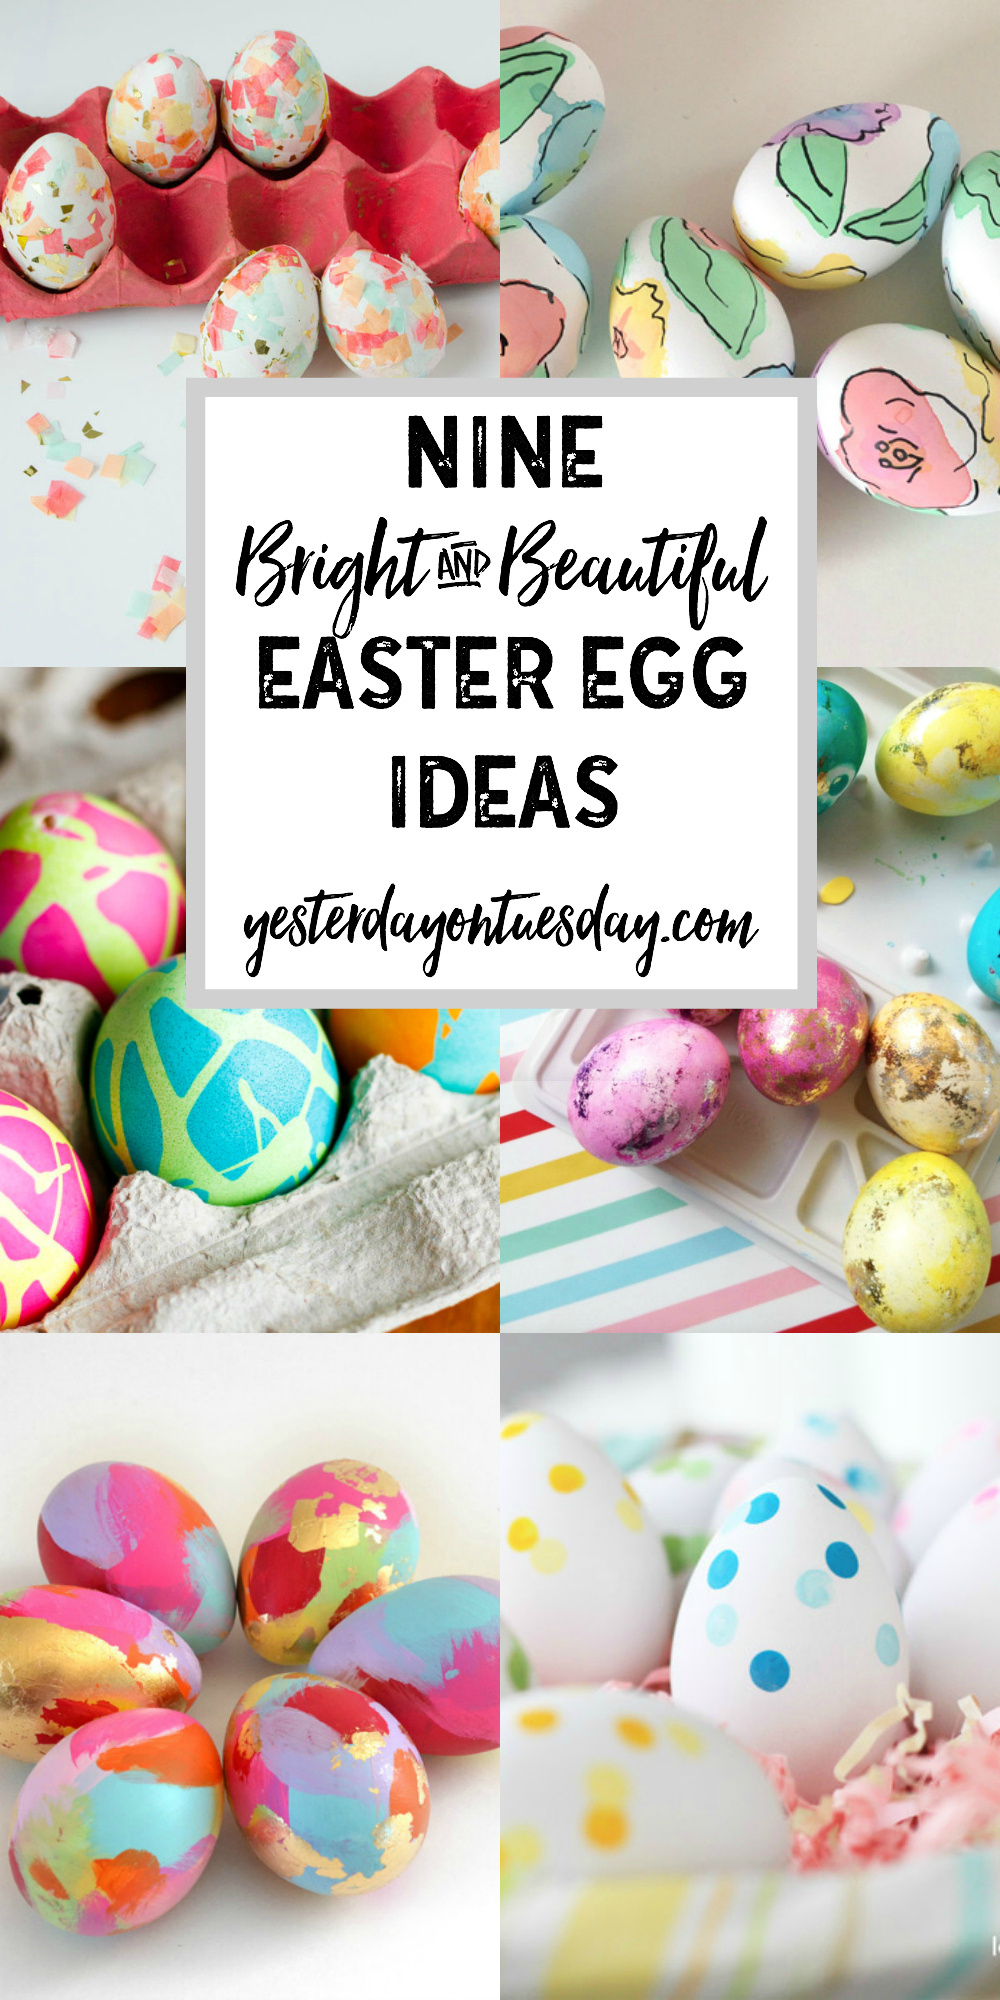 9 Bright and Beautiful Easter Egg Ideas: Lovely ideas for creating gorgeous Easter eggs.